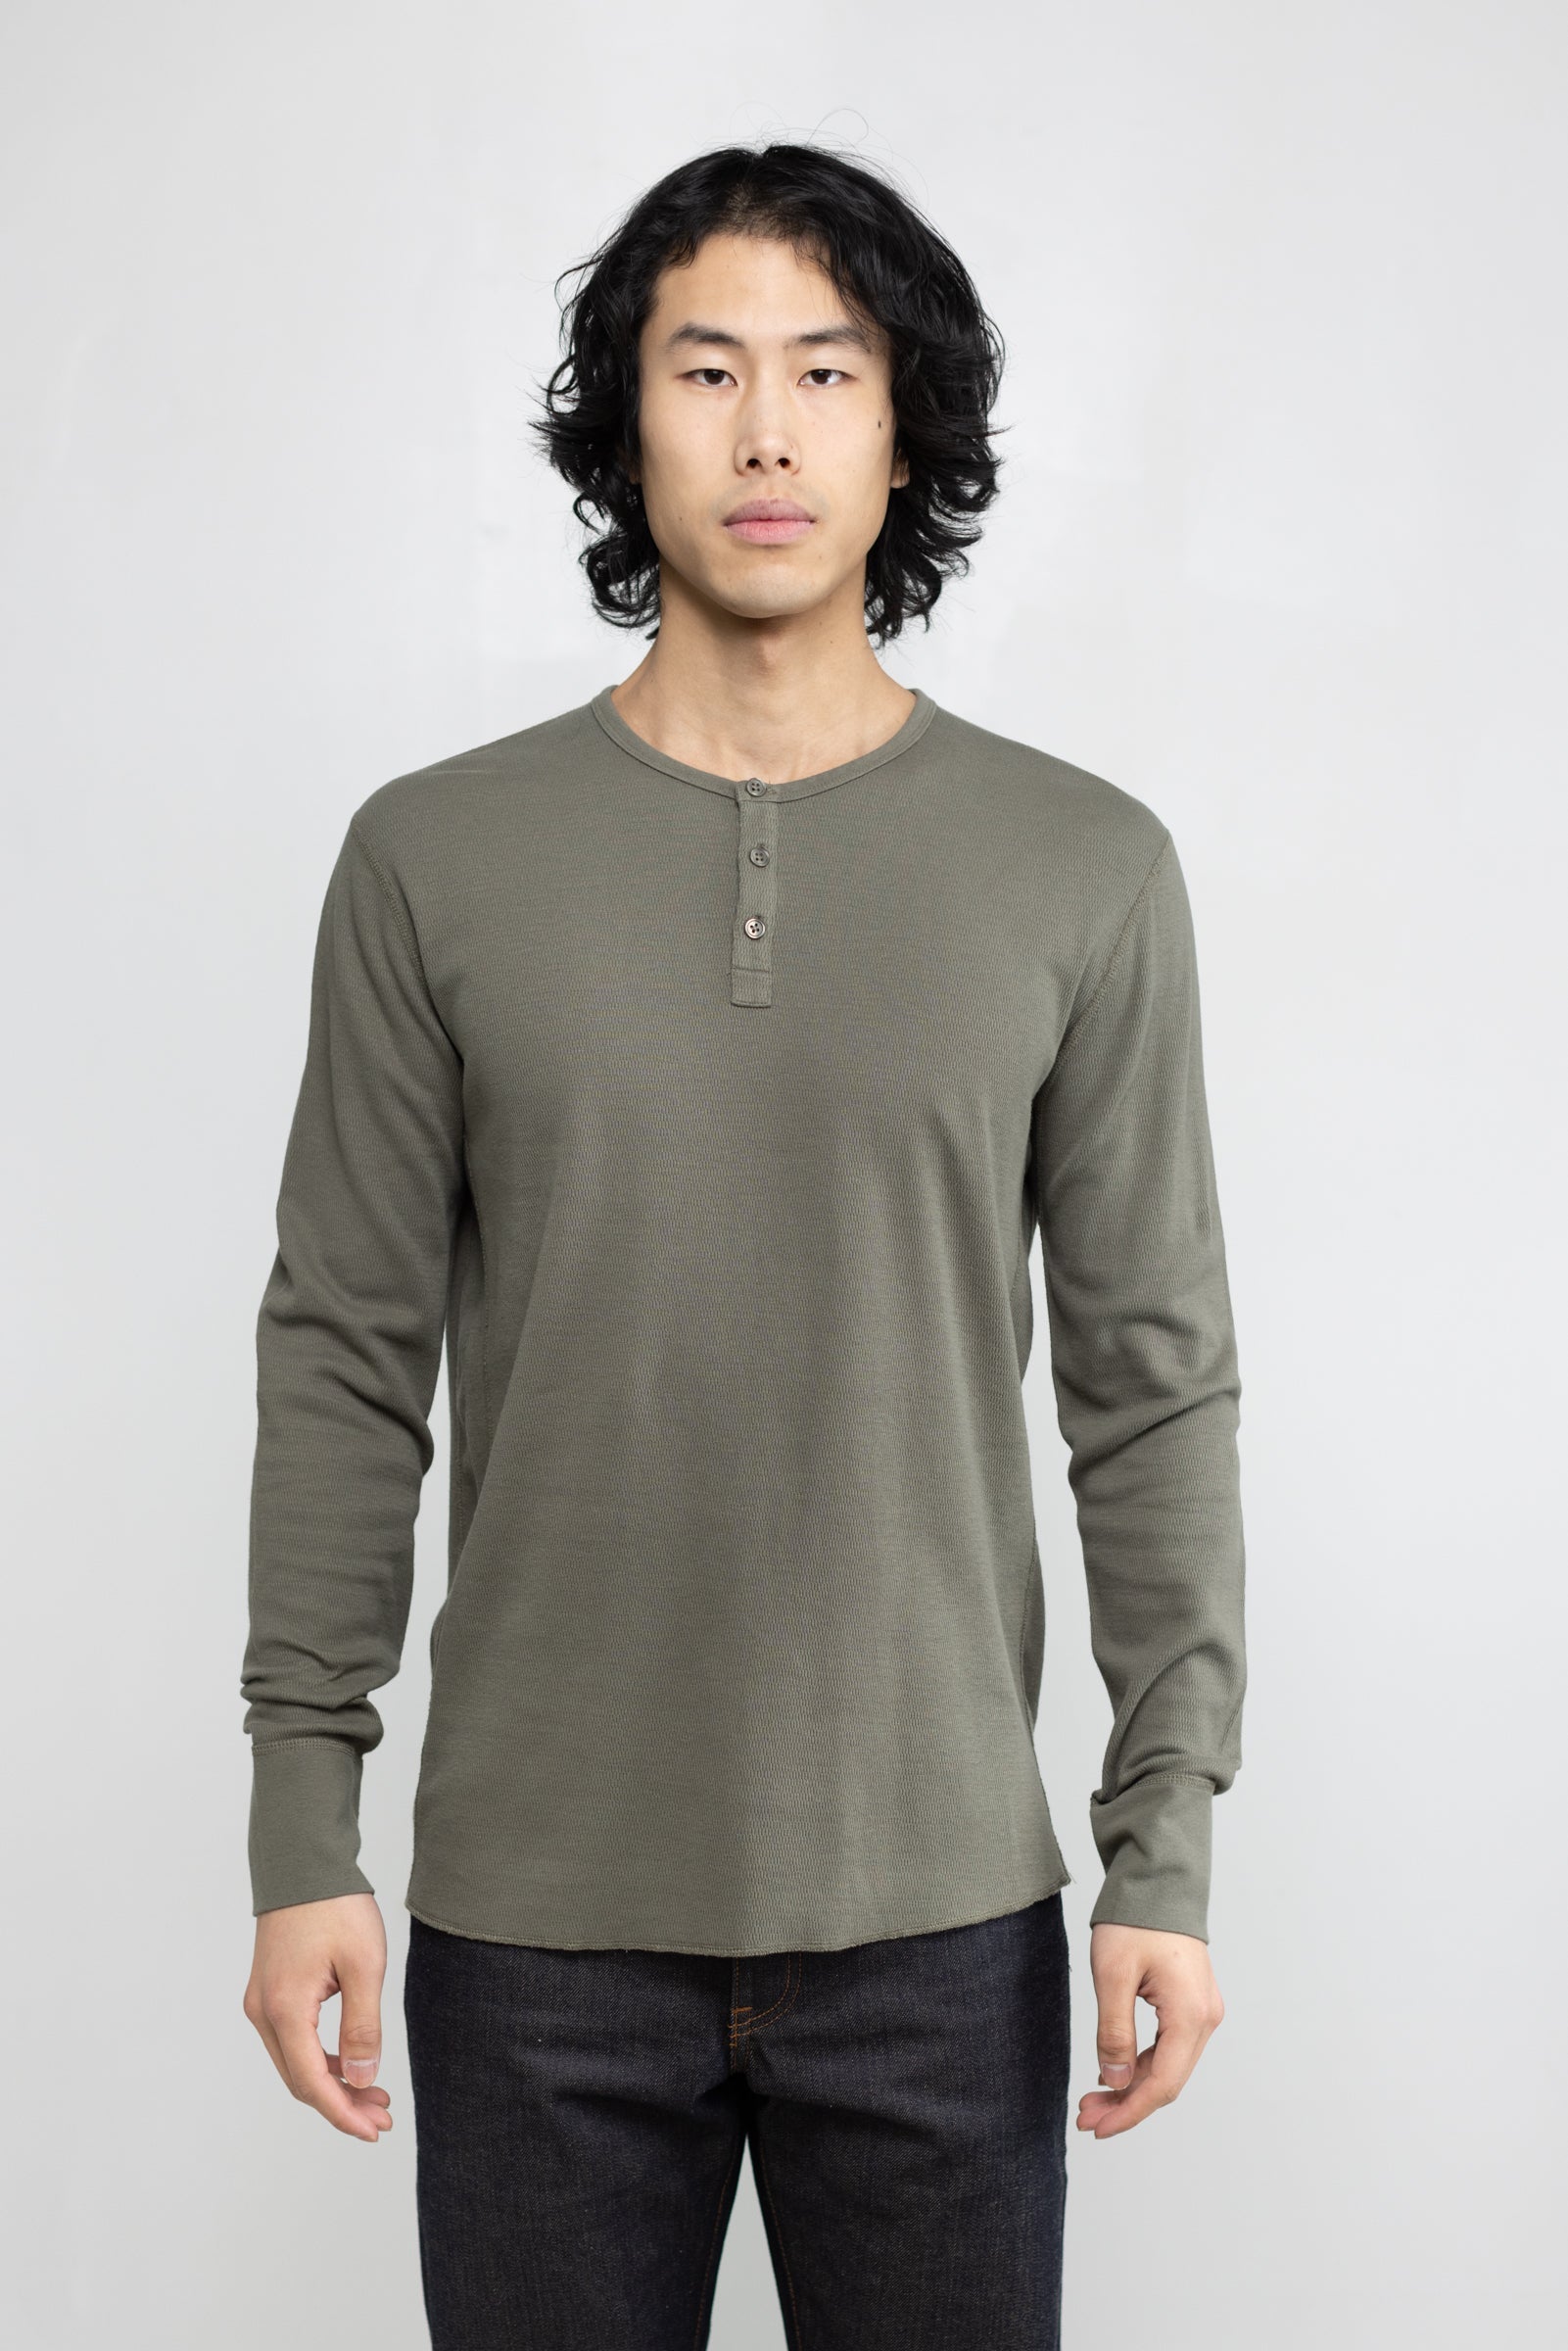 NS2154-7 Mesh Thermal Long Sleeve Henley in Army Green – National